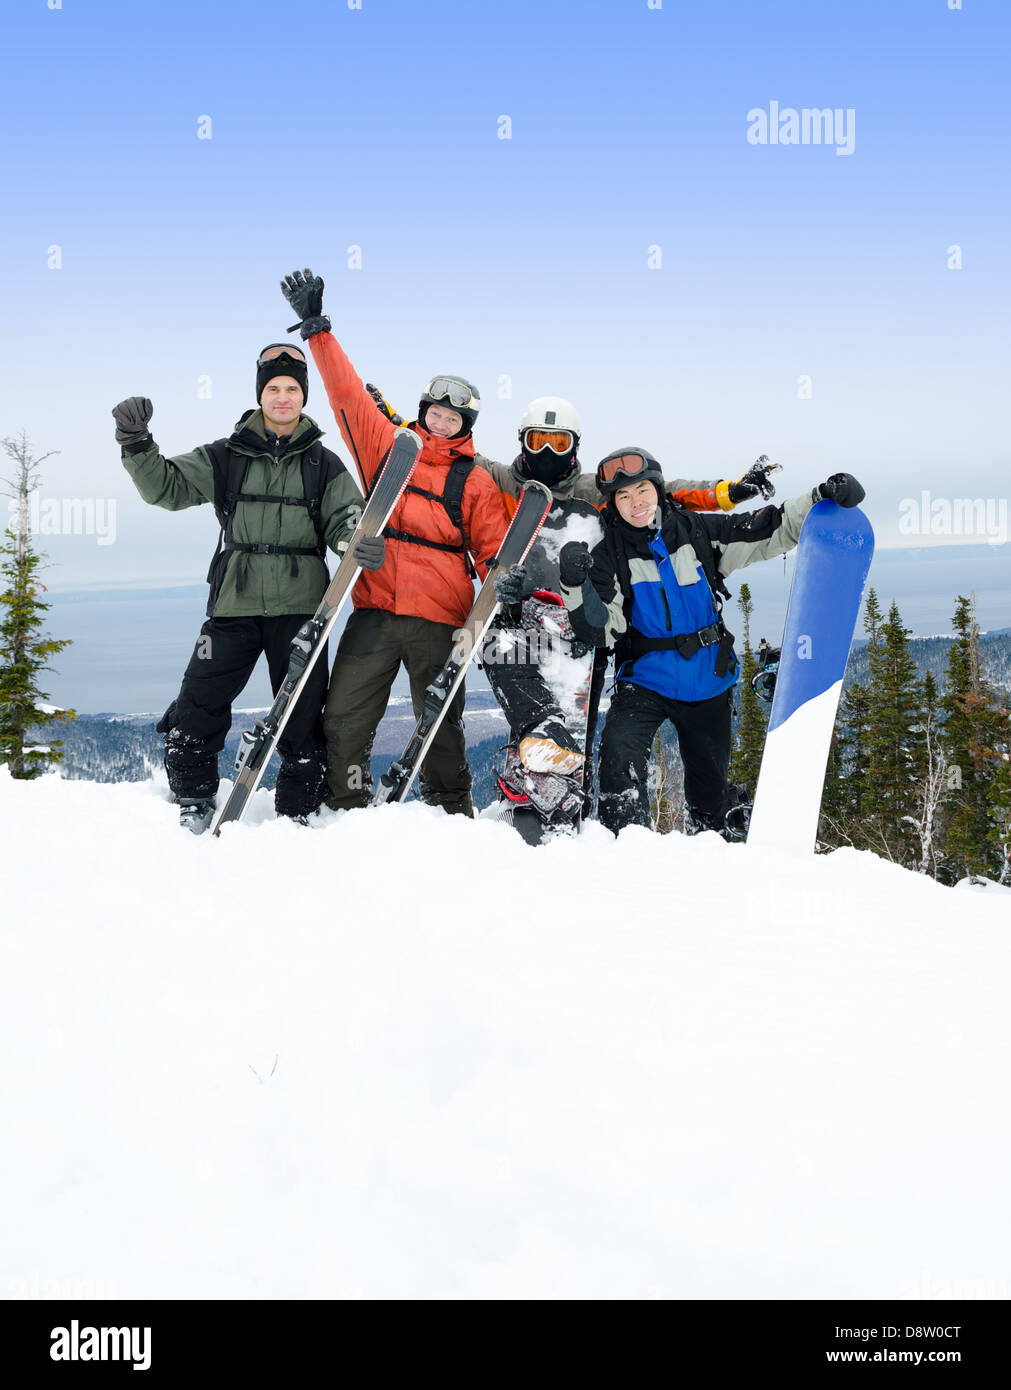 snowboarders and skiers on mountain Stock Photo